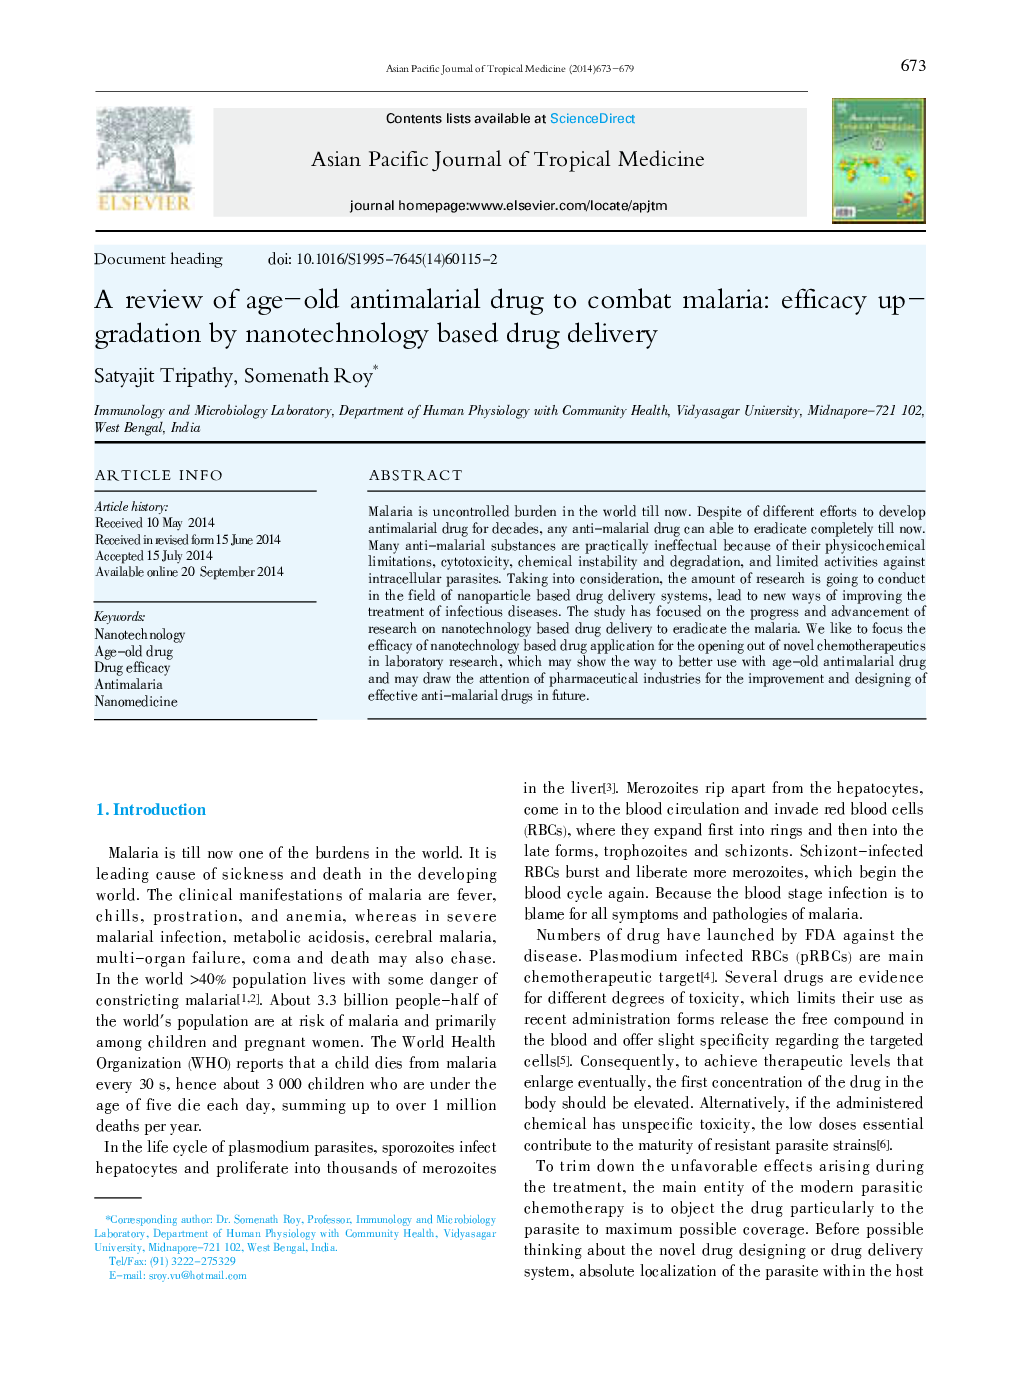 A review of age-old antimalarial drug to combat malaria: efficacy up-gradation by nanotechnology based drug delivery 